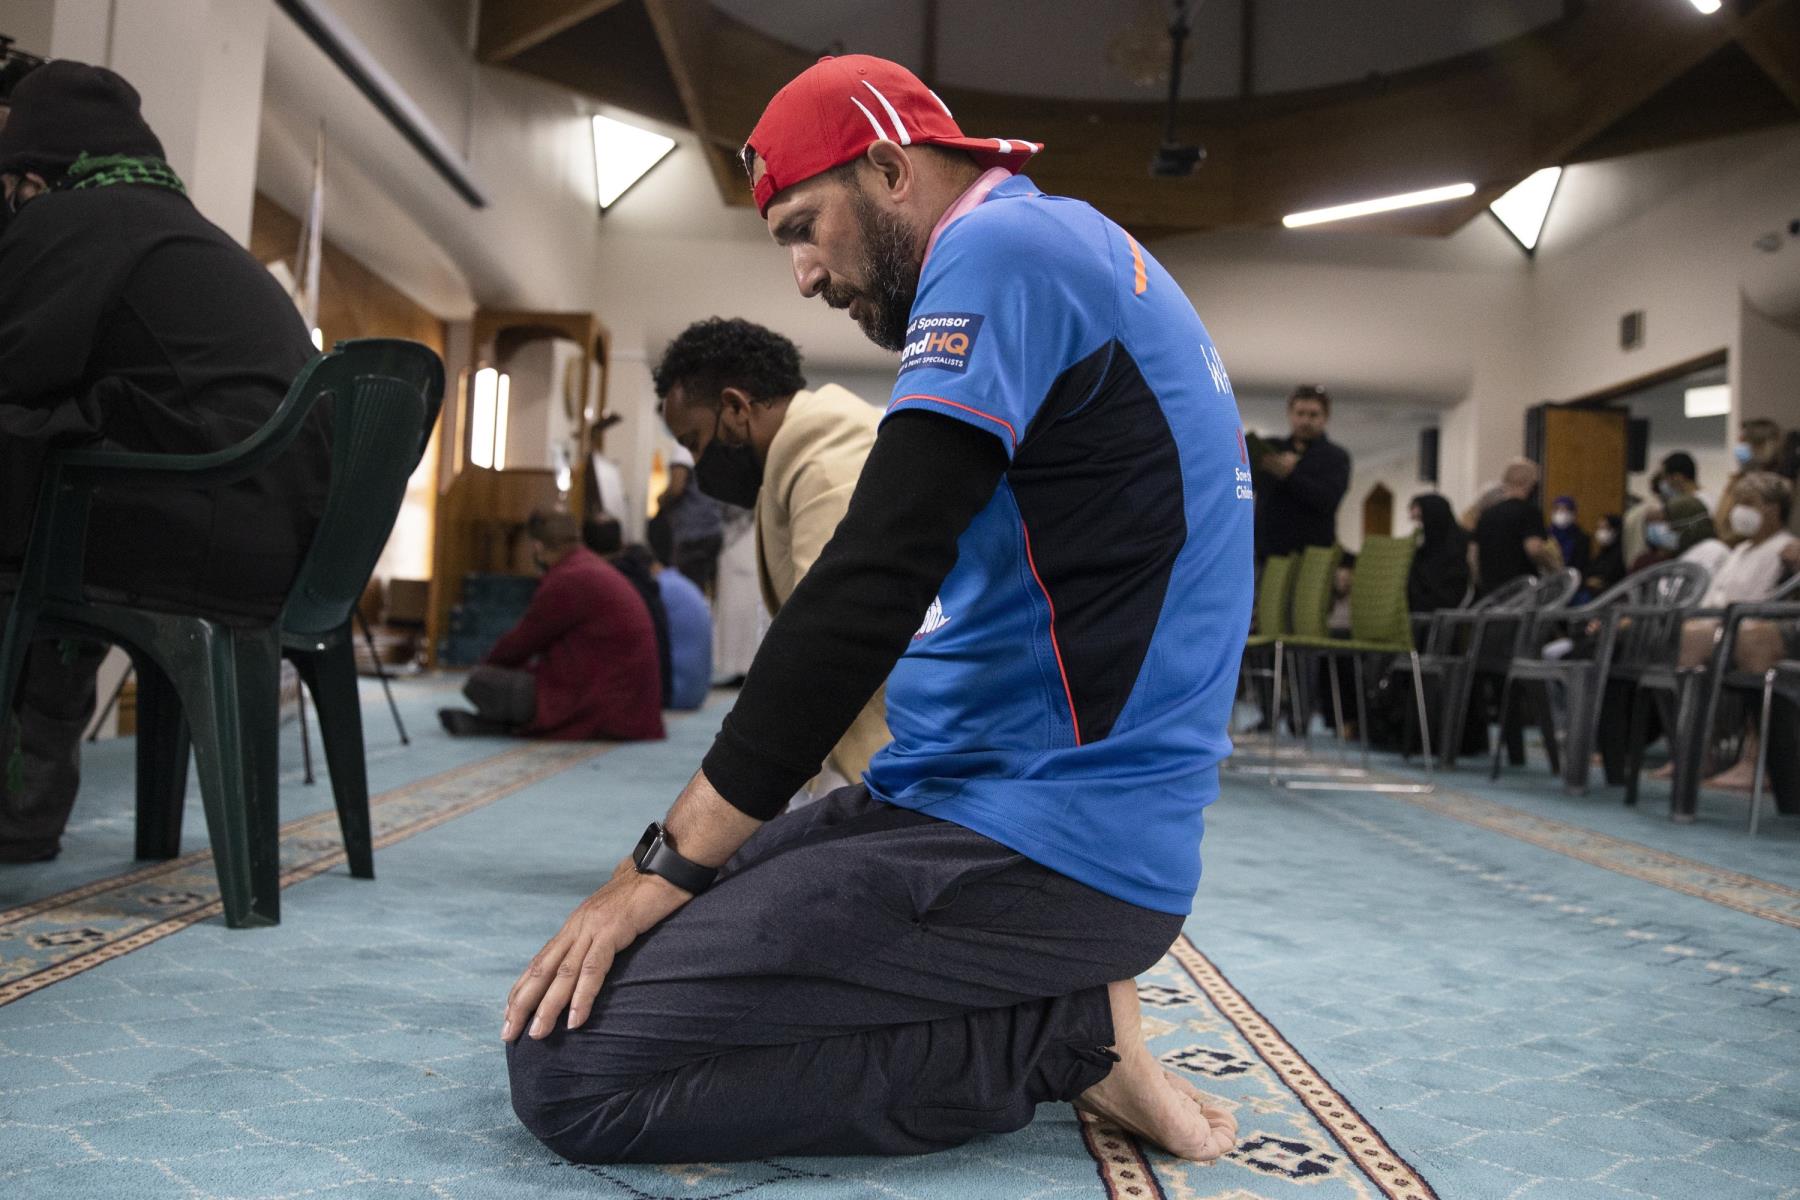 Temel Ataçocuğu prays after completing his walk, at Al Noor Mosque, in Christchurch, New Zealand, March 15, 2022. (AP PHOTO)